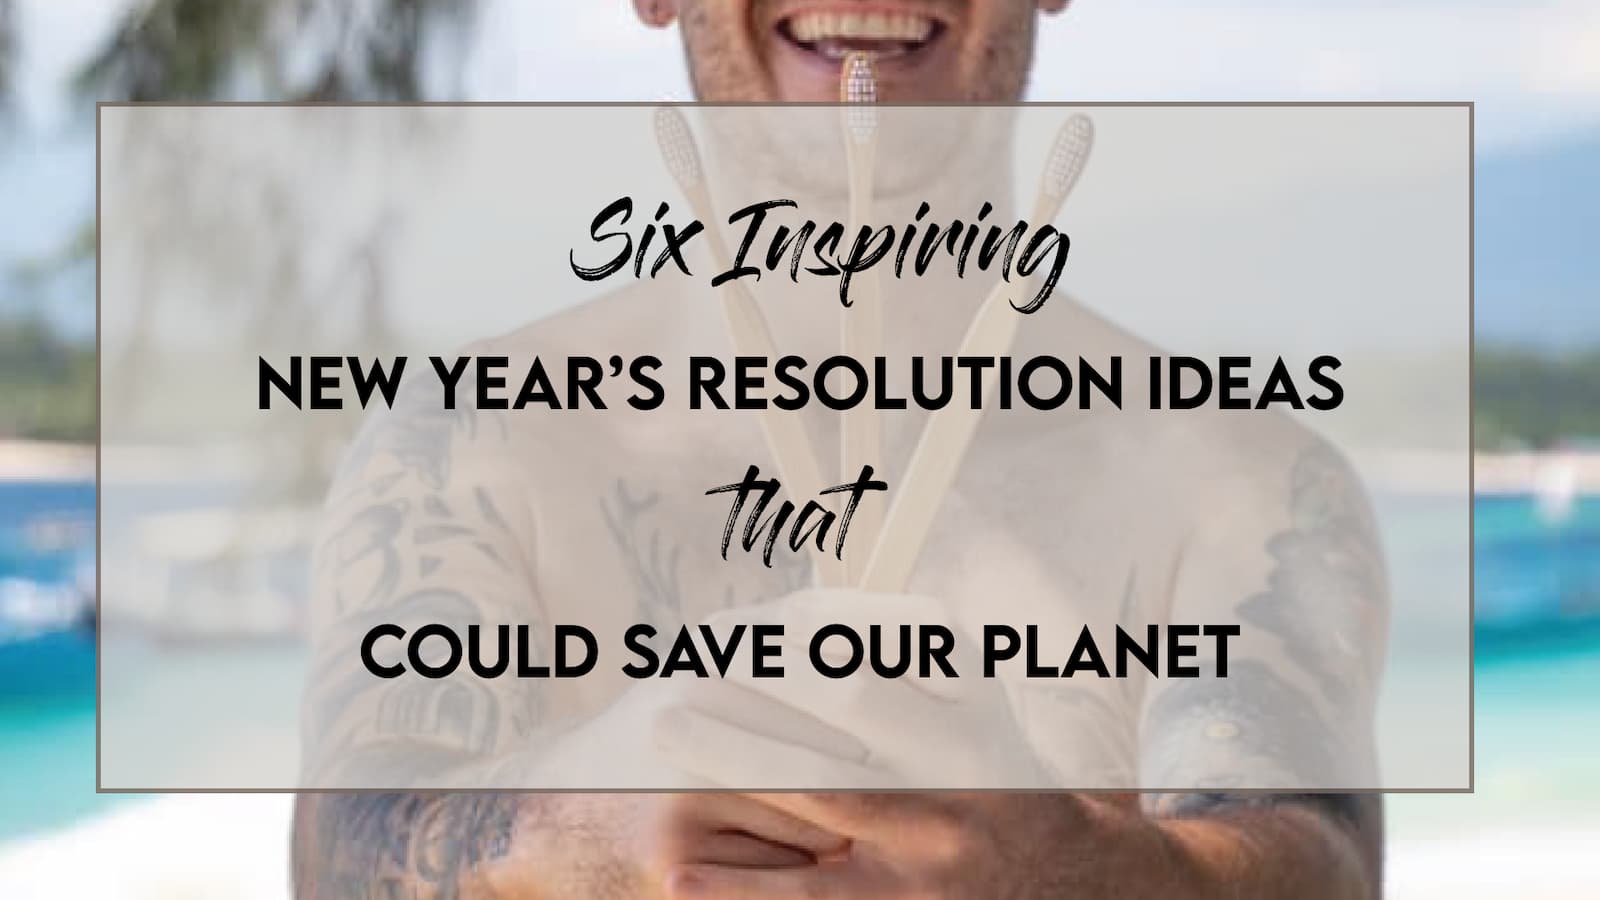 Six inspiring new year's resolution ideas for 2021